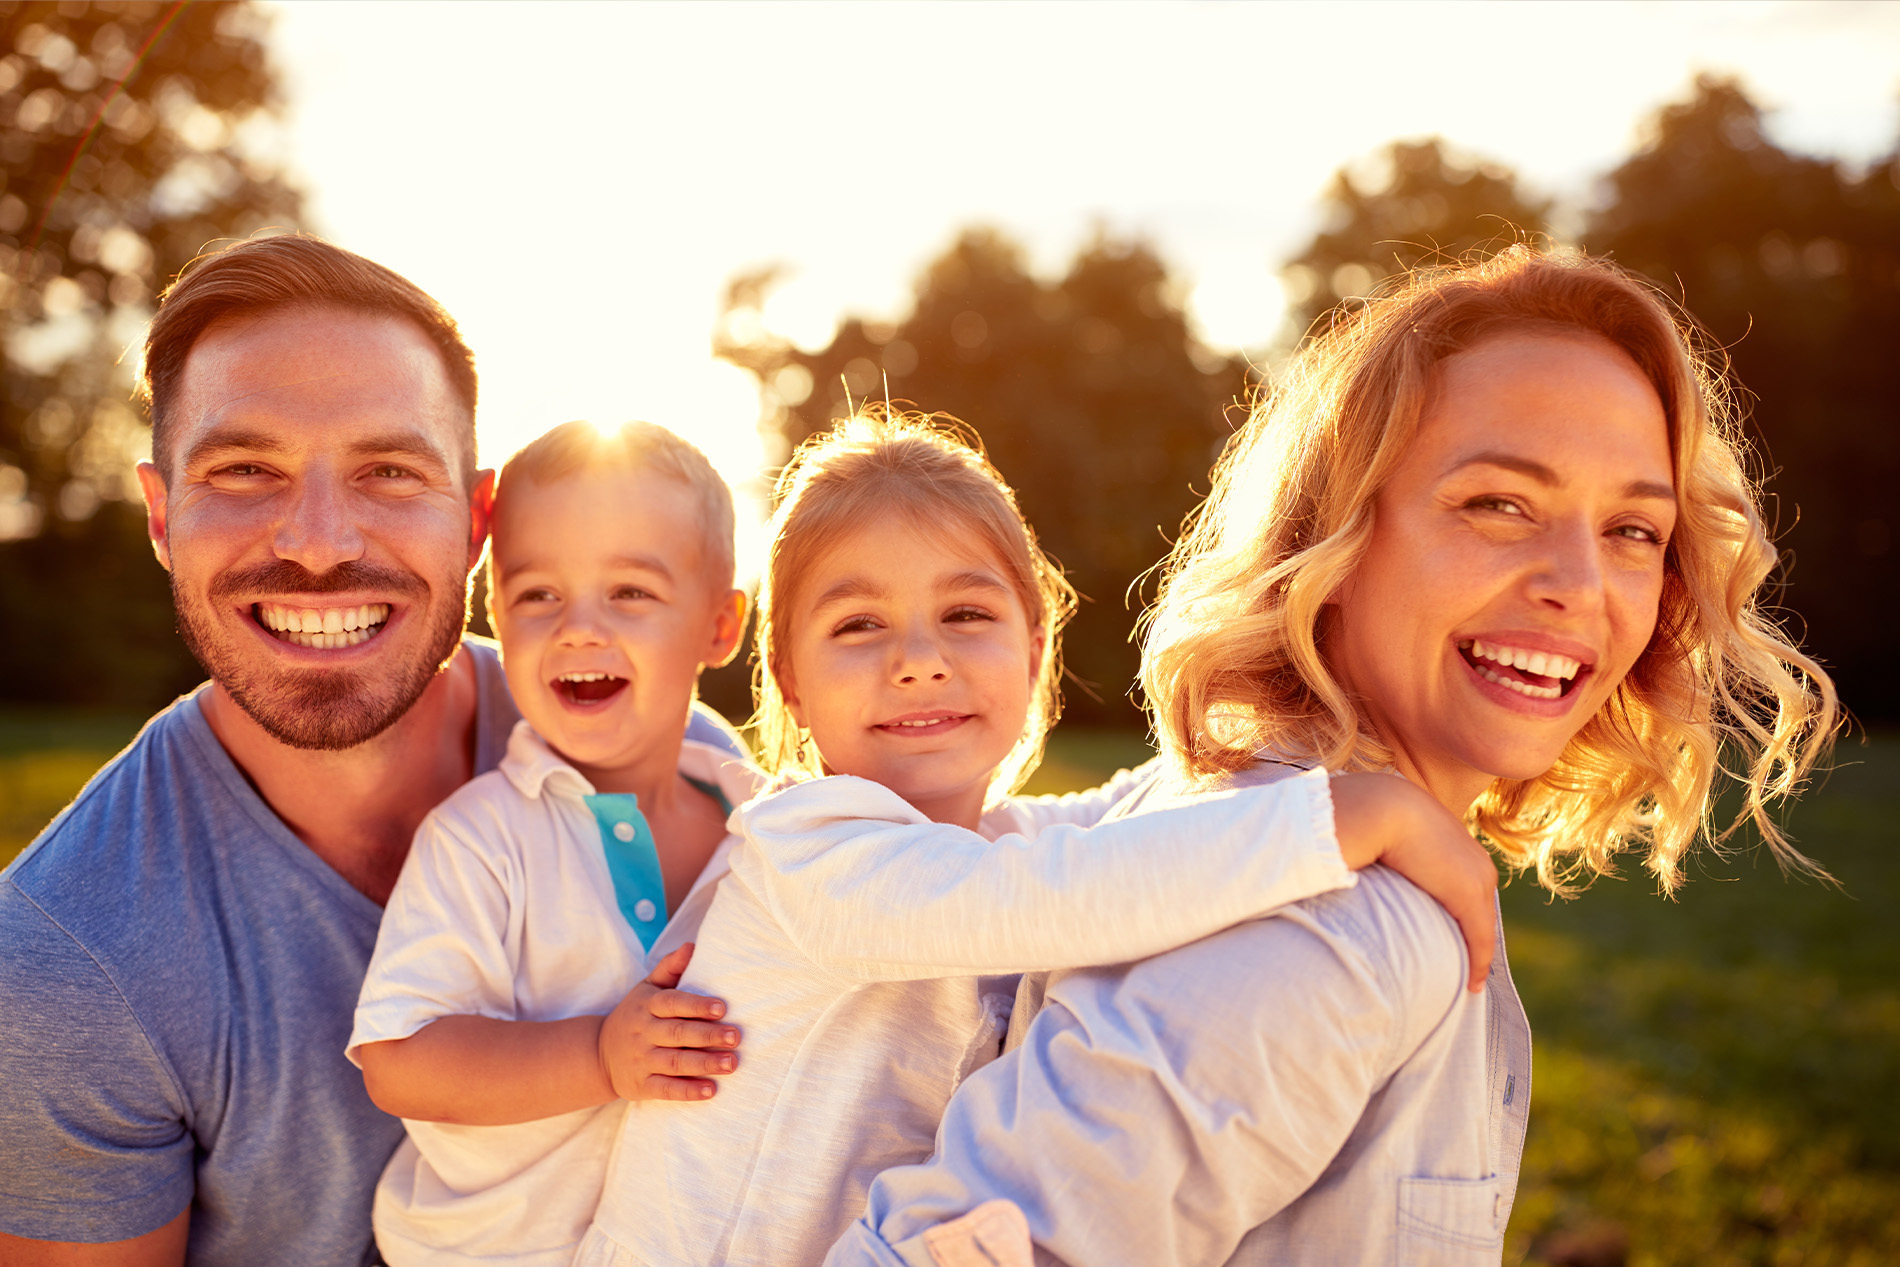 Hagerstown Family Dental | TMJ Disorders, Emergency Treatment and Periodontal Treatment